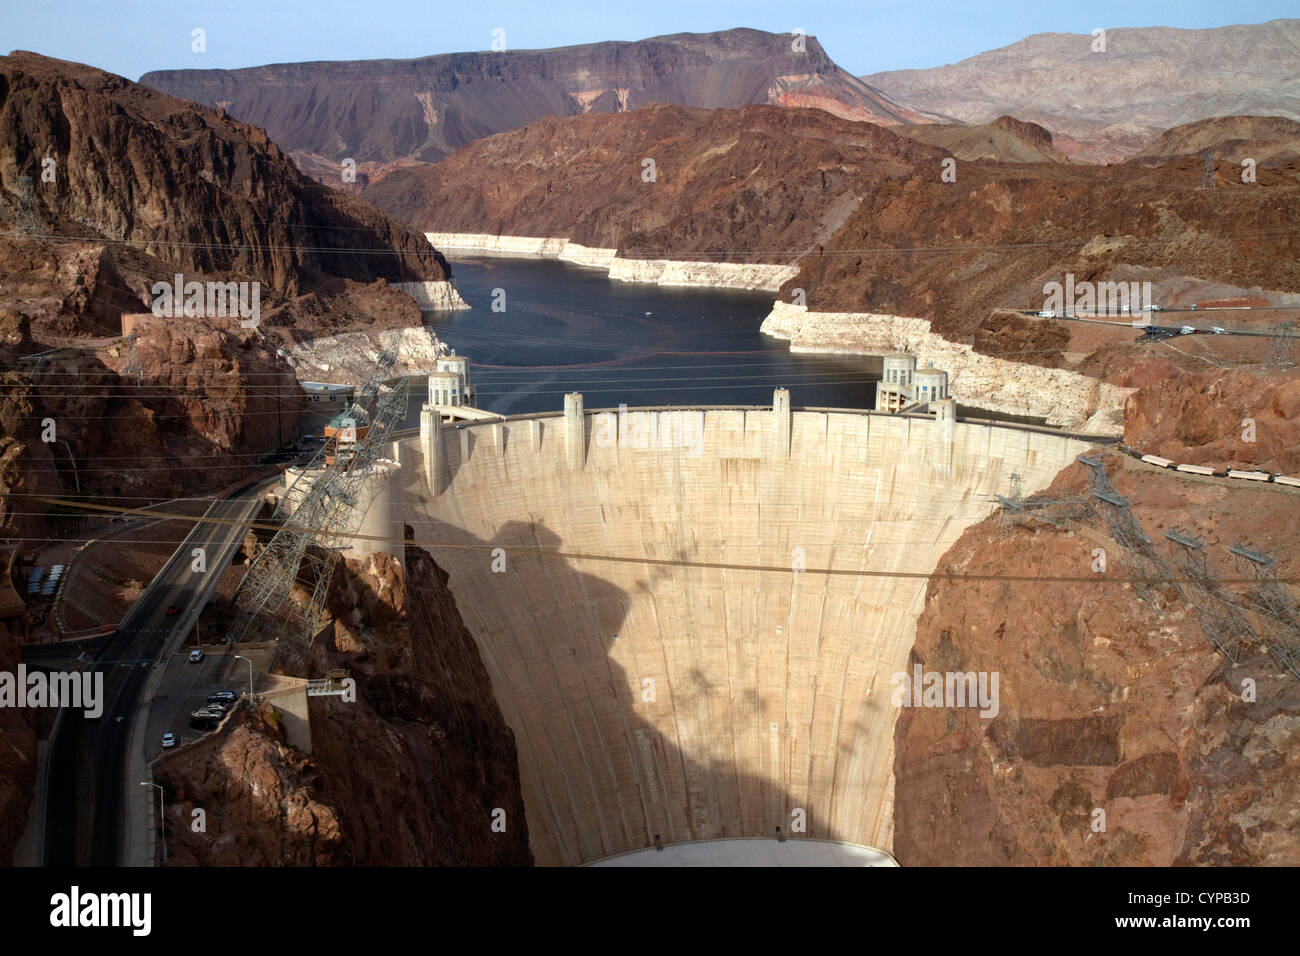 The Hoover Dam located in the Black Canyon of the Colorado River on the border between Arizona and Nevada, USA. Stock Photo